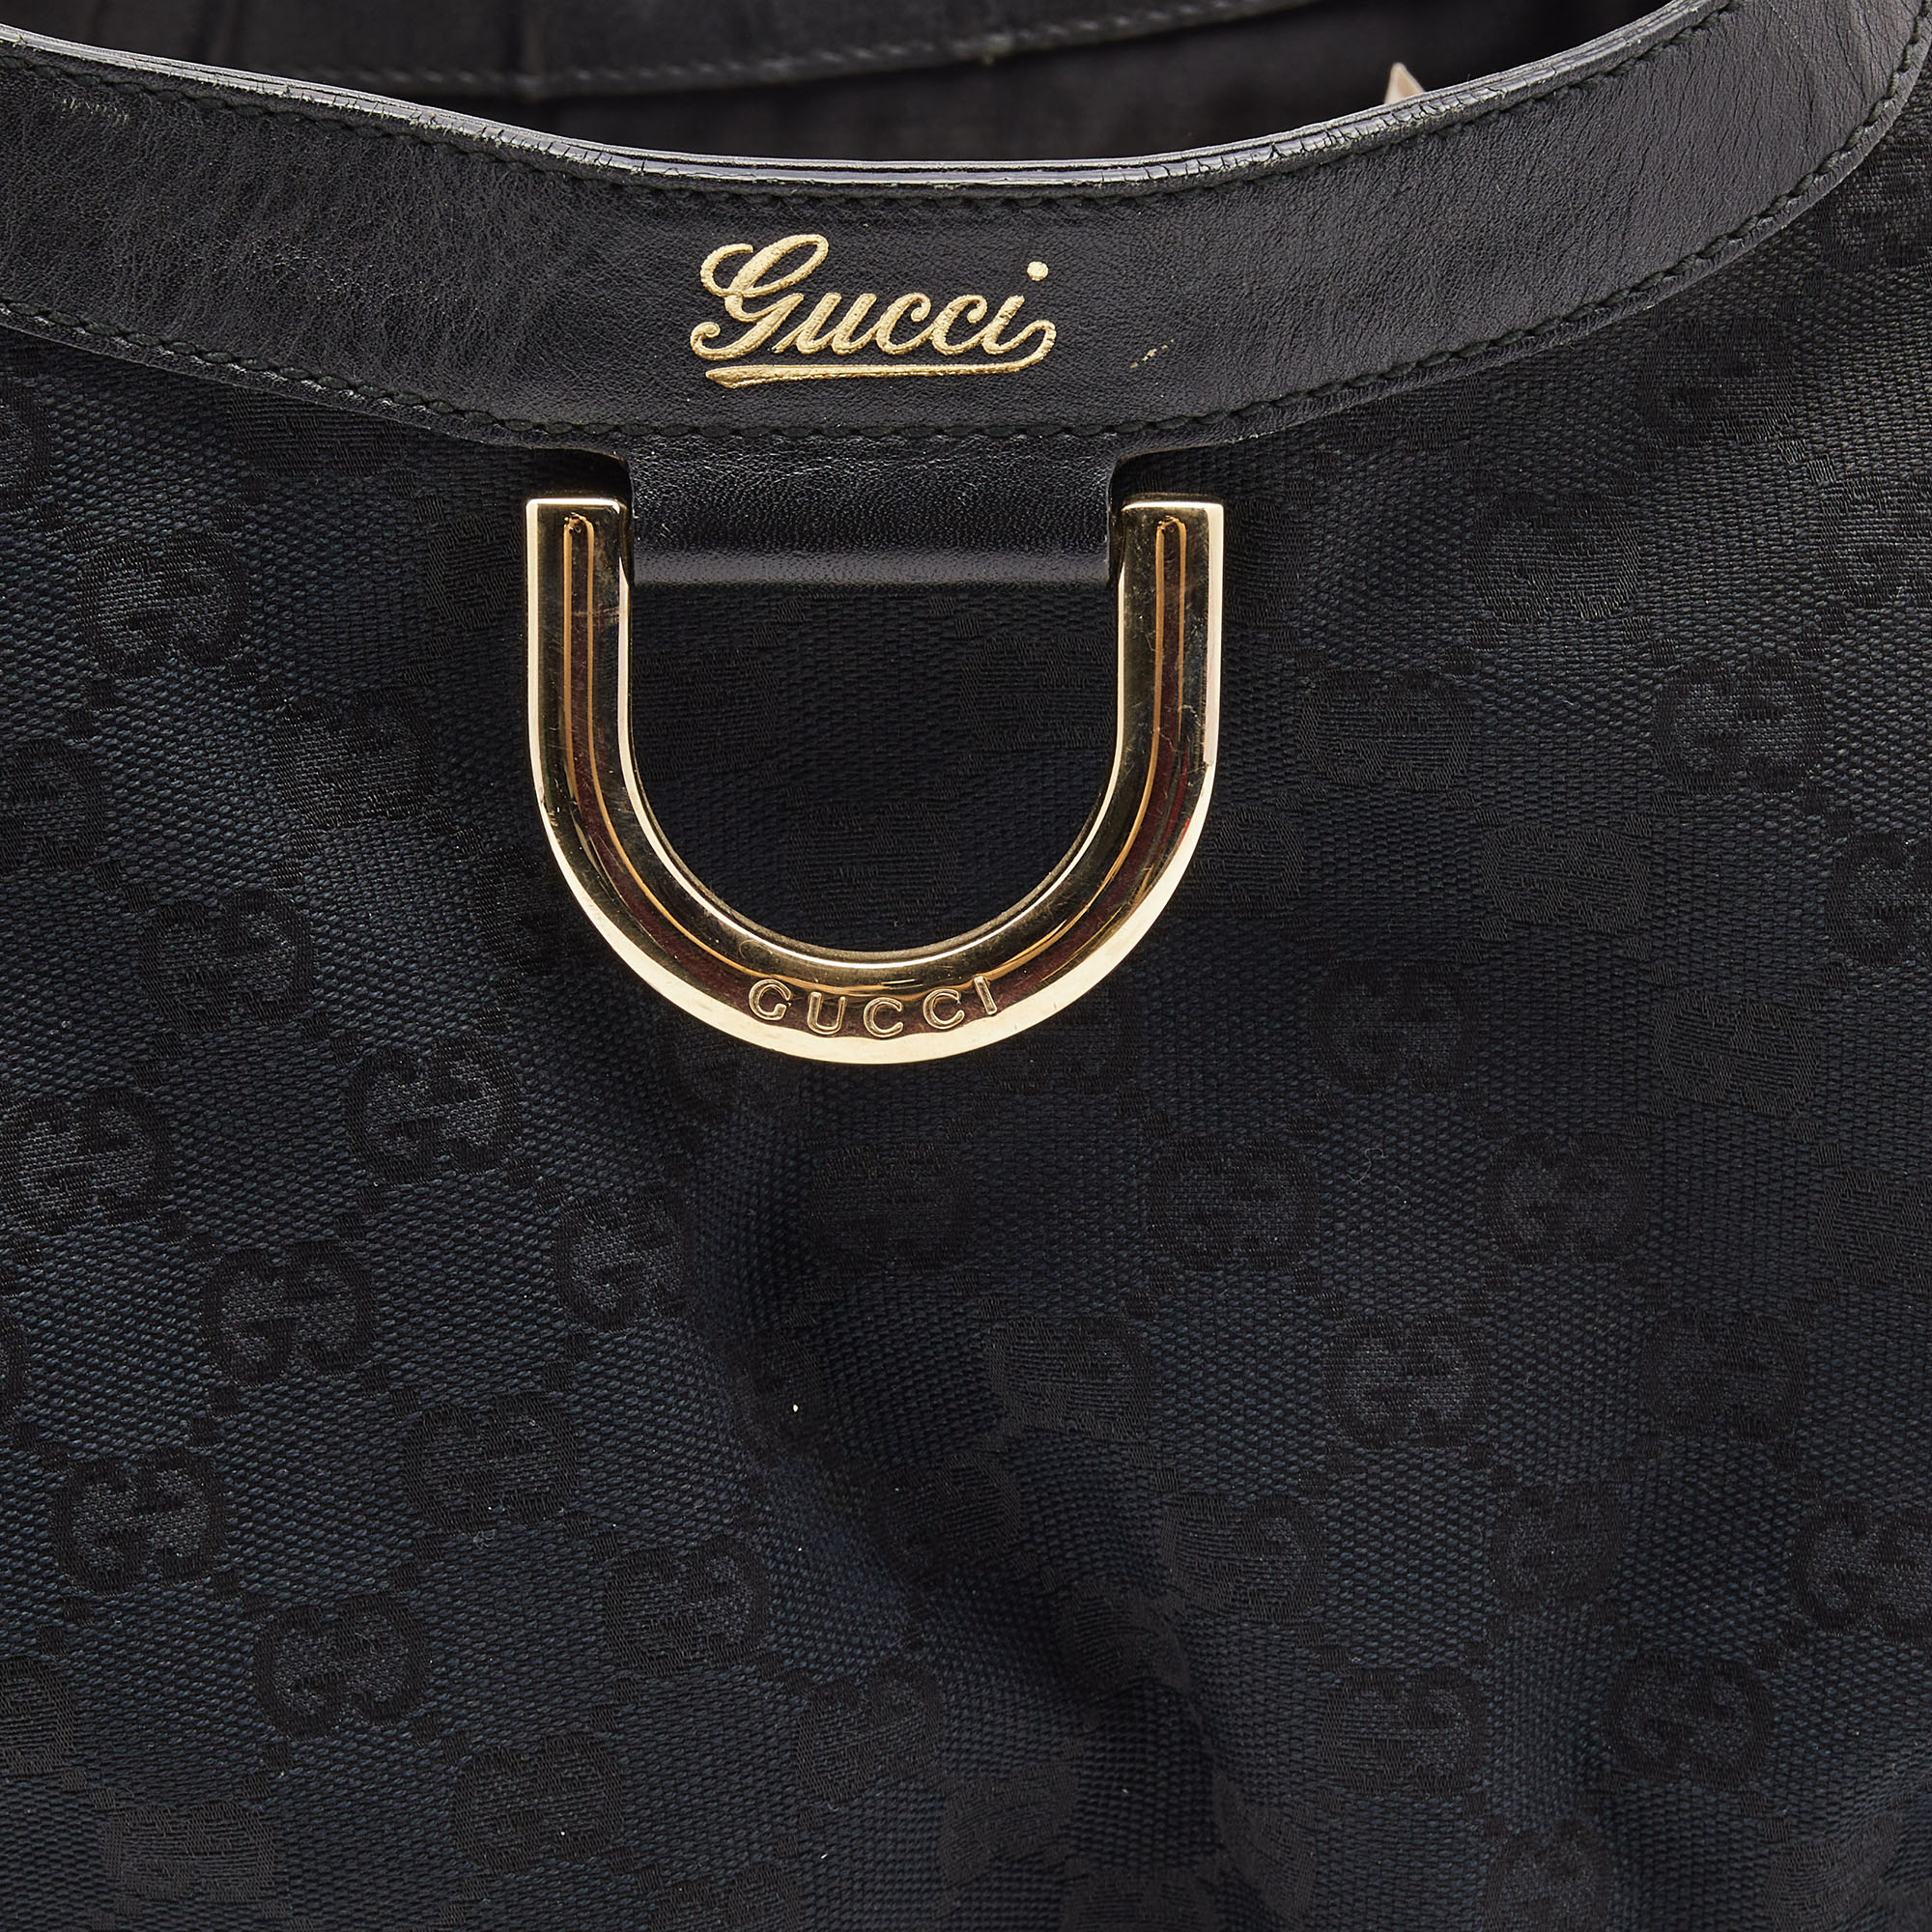 Gucci Black GG Canvas And Leather Large Abbey D Ring Shoulder Bag